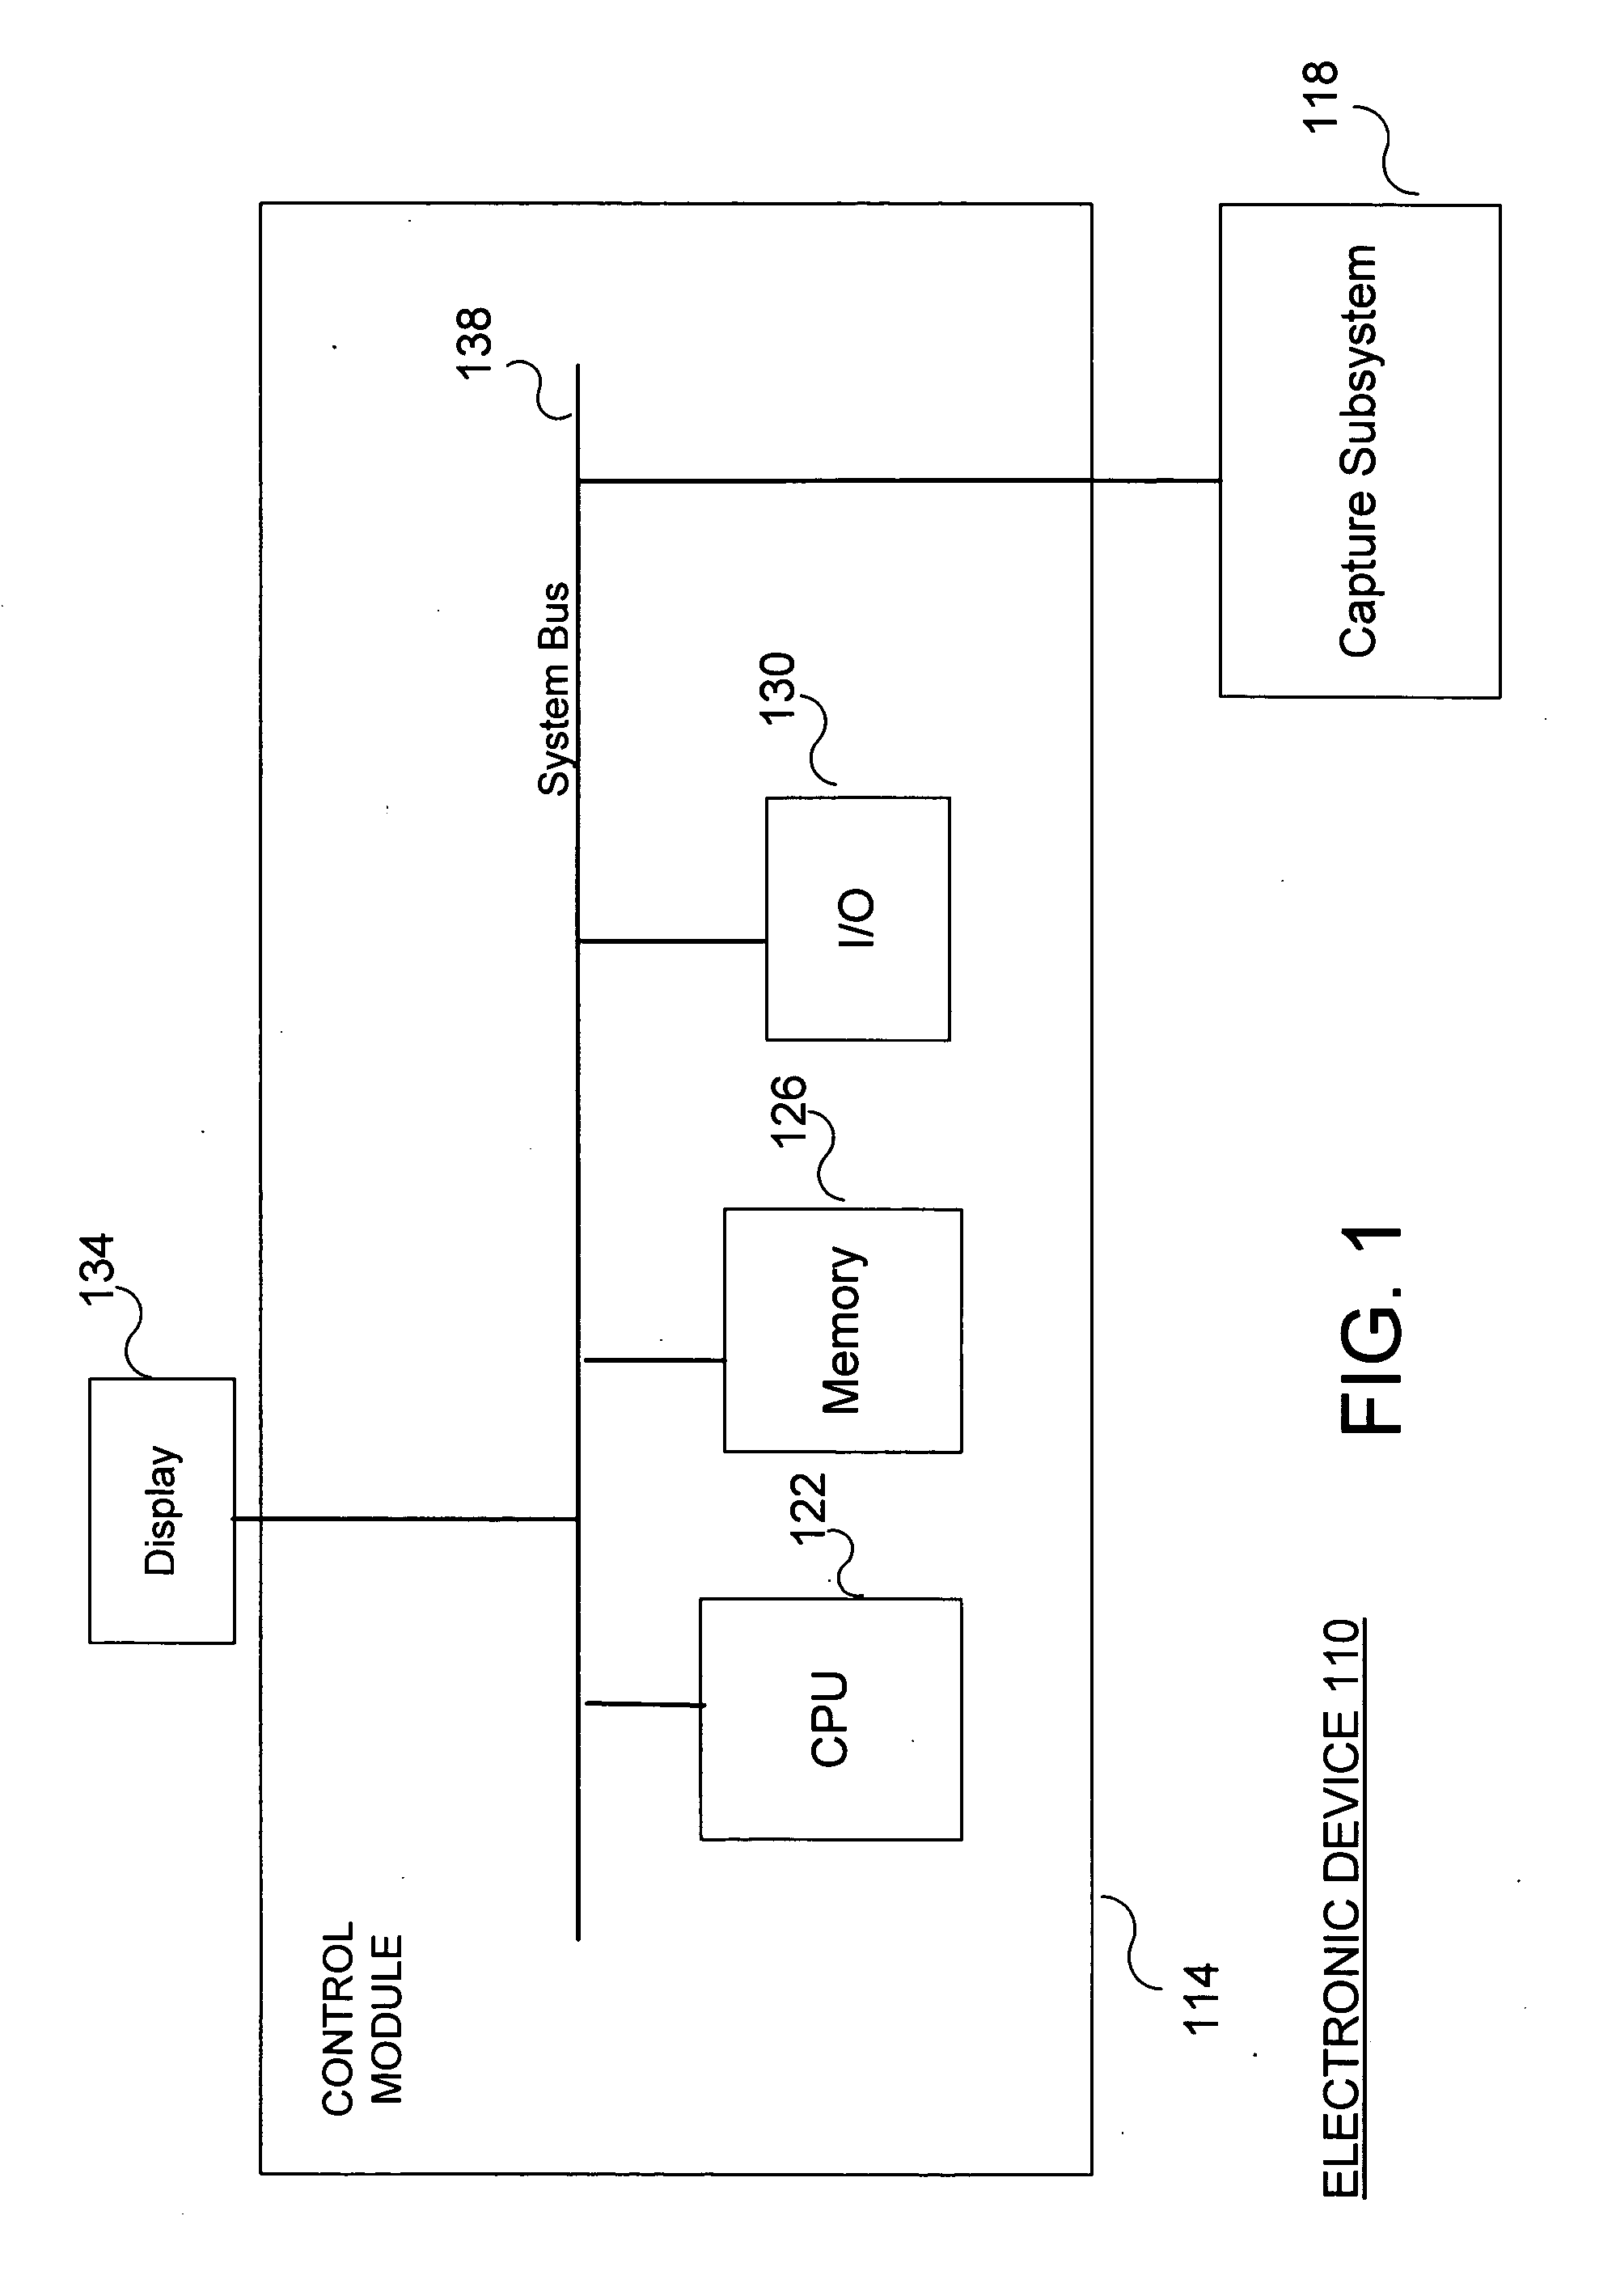 System and method for efficiently performing a pattern matching procedure